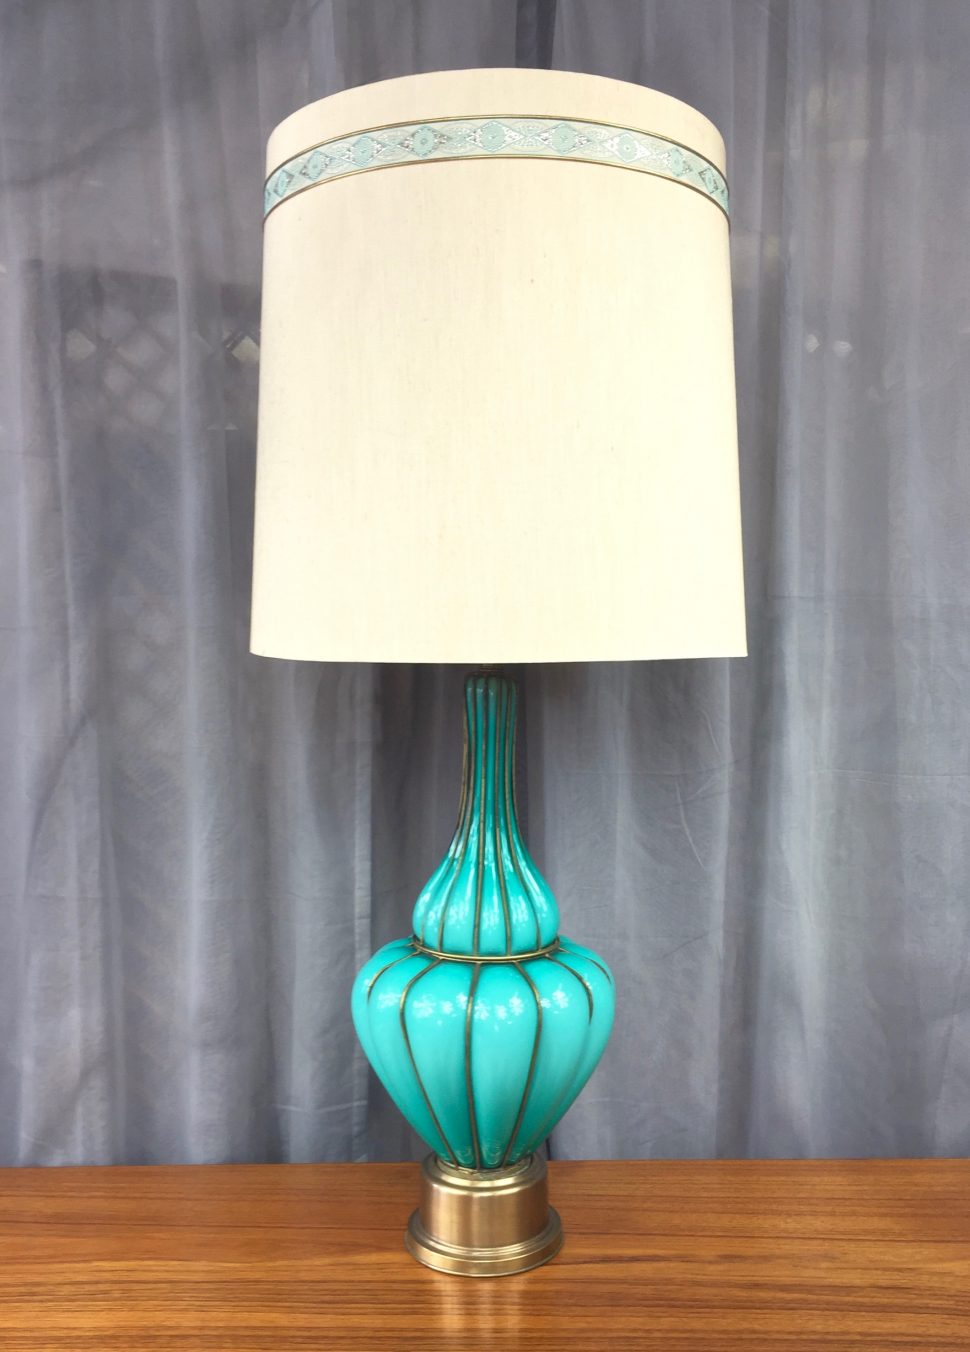 lamp turquoise colored murano glass table marbro lamps monumental and brass find bronze french gold cream tables accent torchiere floor bedside lights unique large high wood